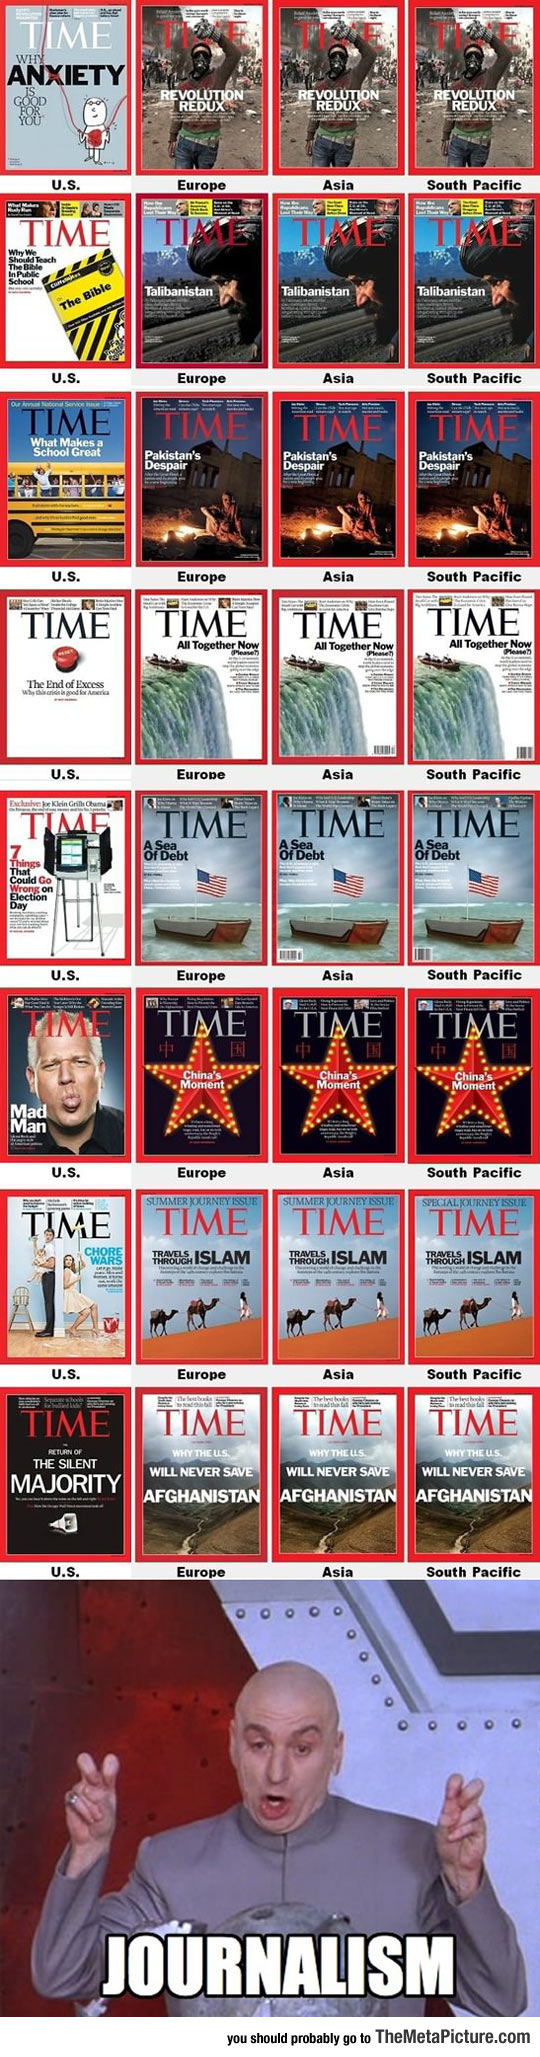 Americans Will Probably Never See These Covers